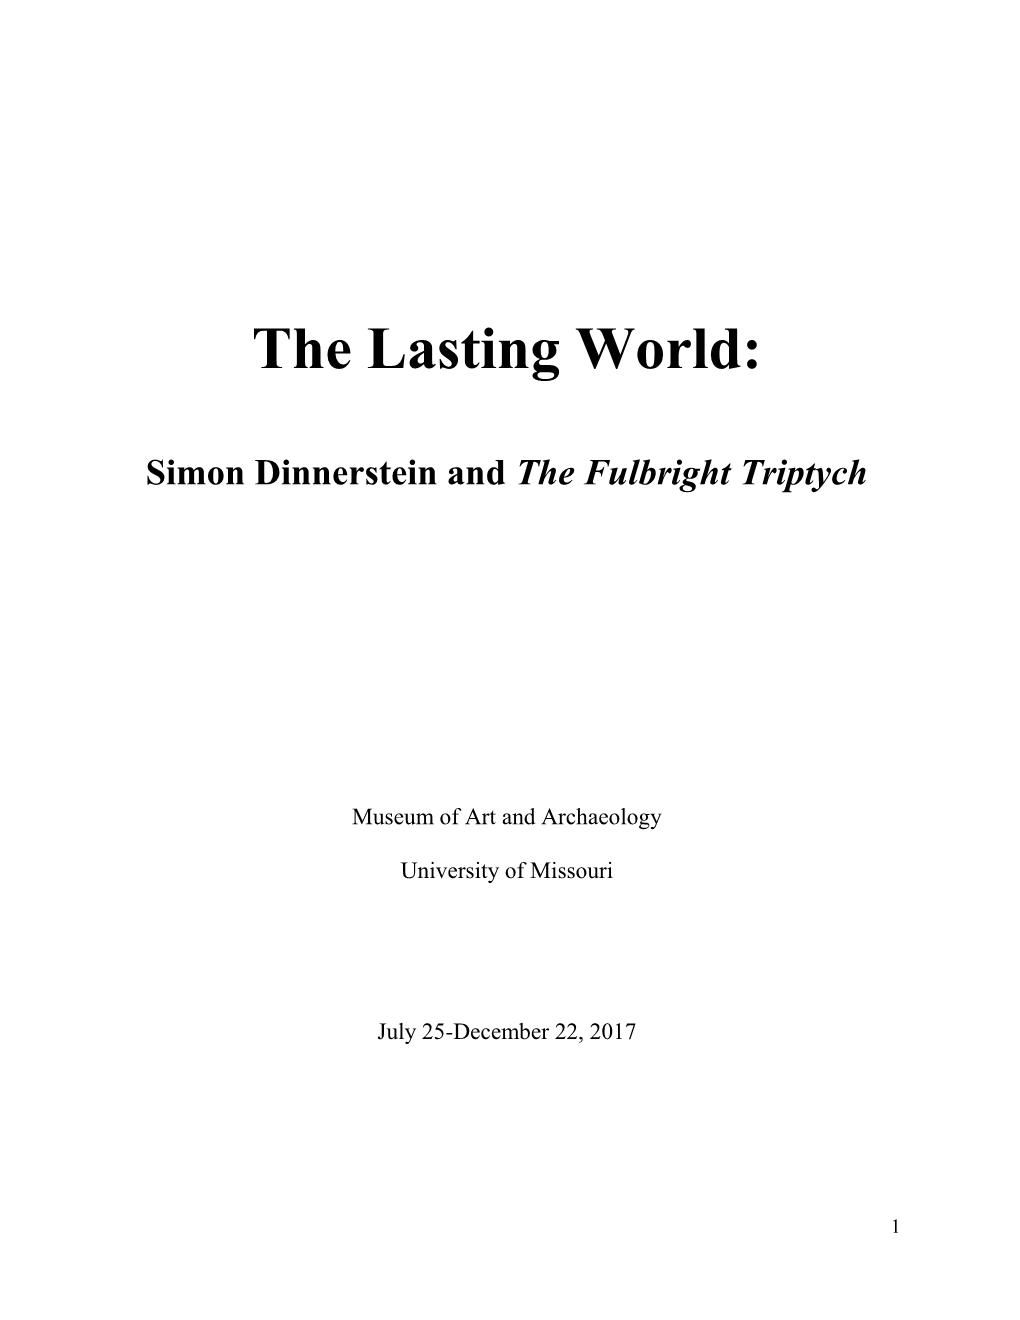 The Lasting World: Simon Dinnerstein and the Fulbright Triptych